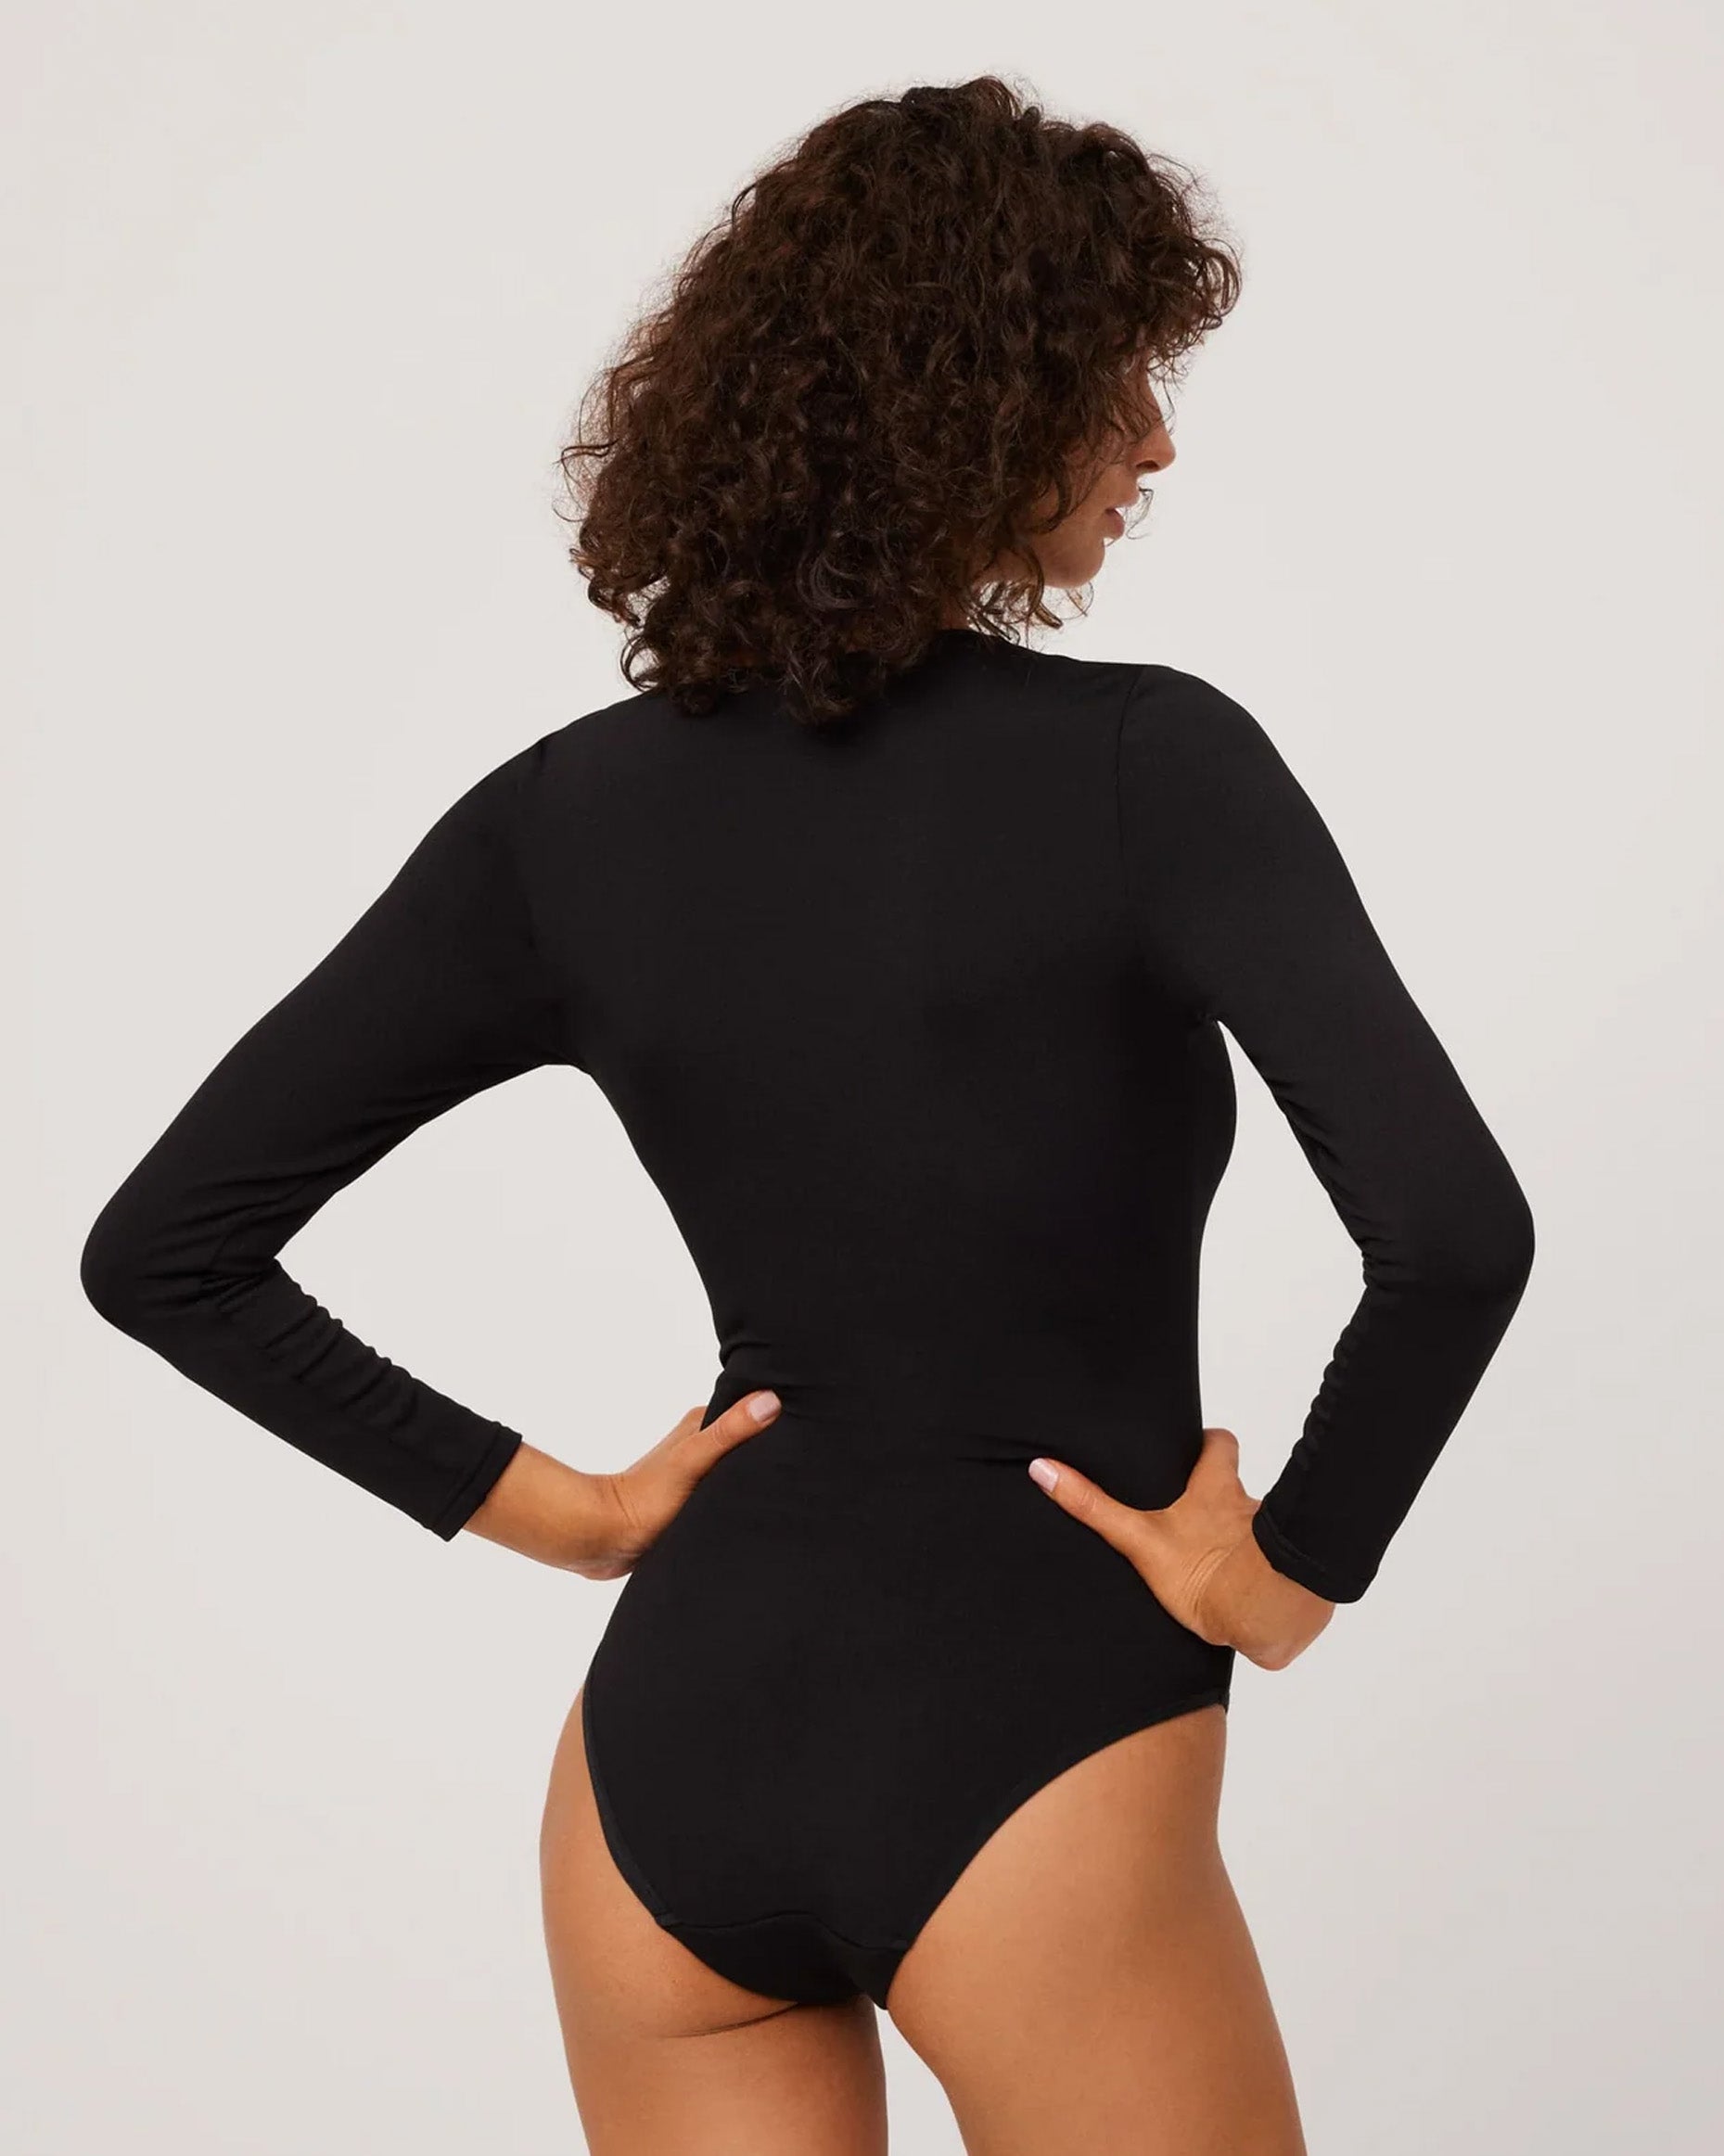 Ysabel Mora 70013 Lace Trim Body-Top - Black soft and warm fleece lined long sleeved body-suit.